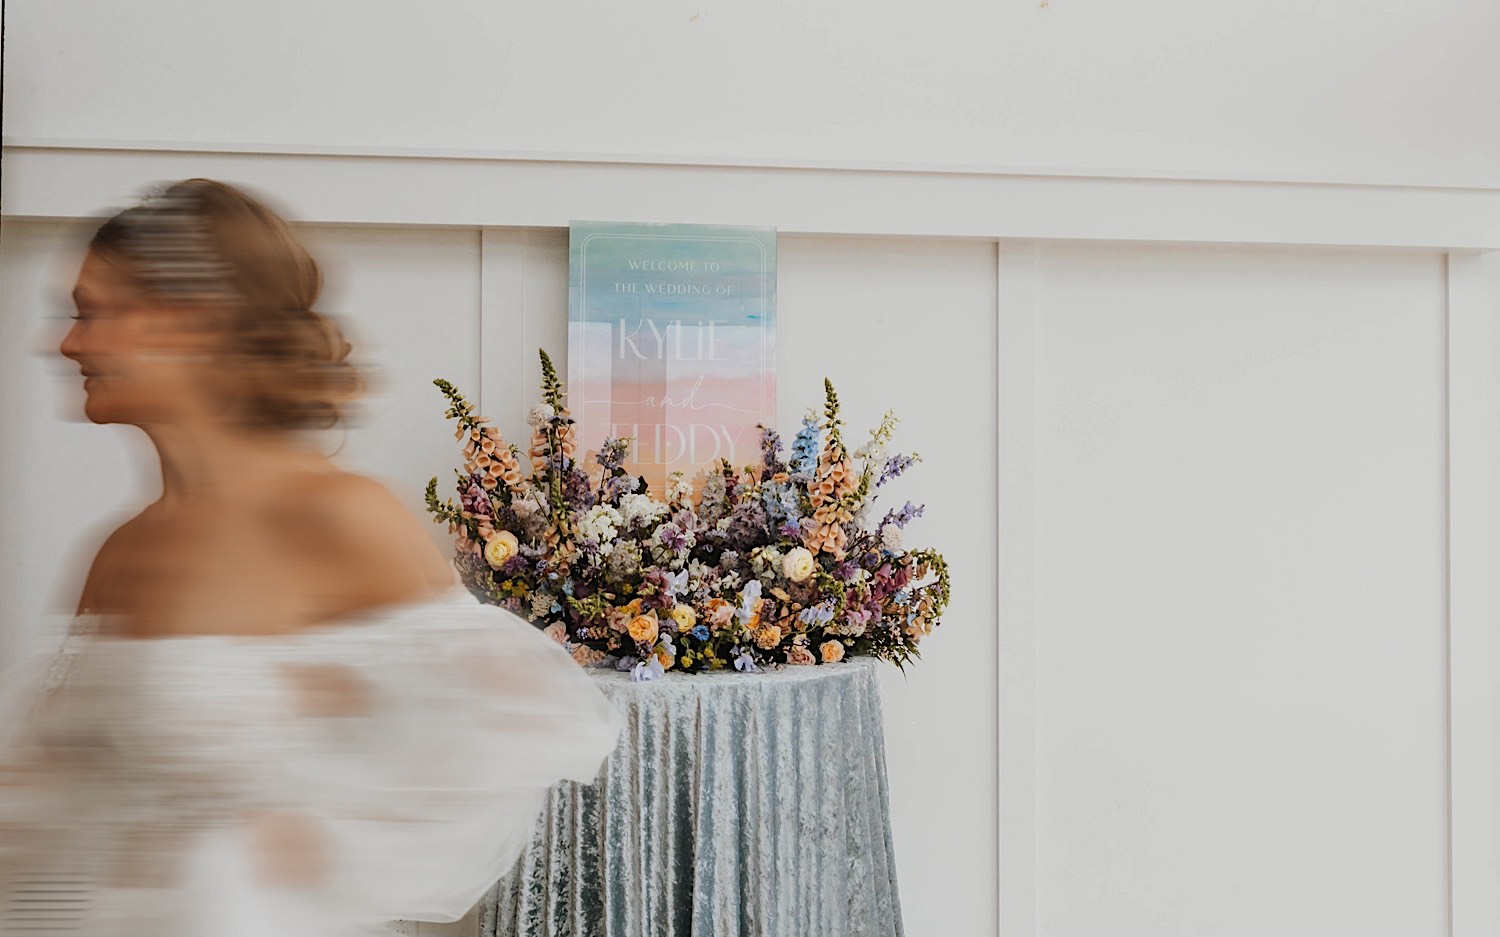 A bride runs across the photo, behind her is a table with flowers on it and a custom sign for her wedding at The Aisling